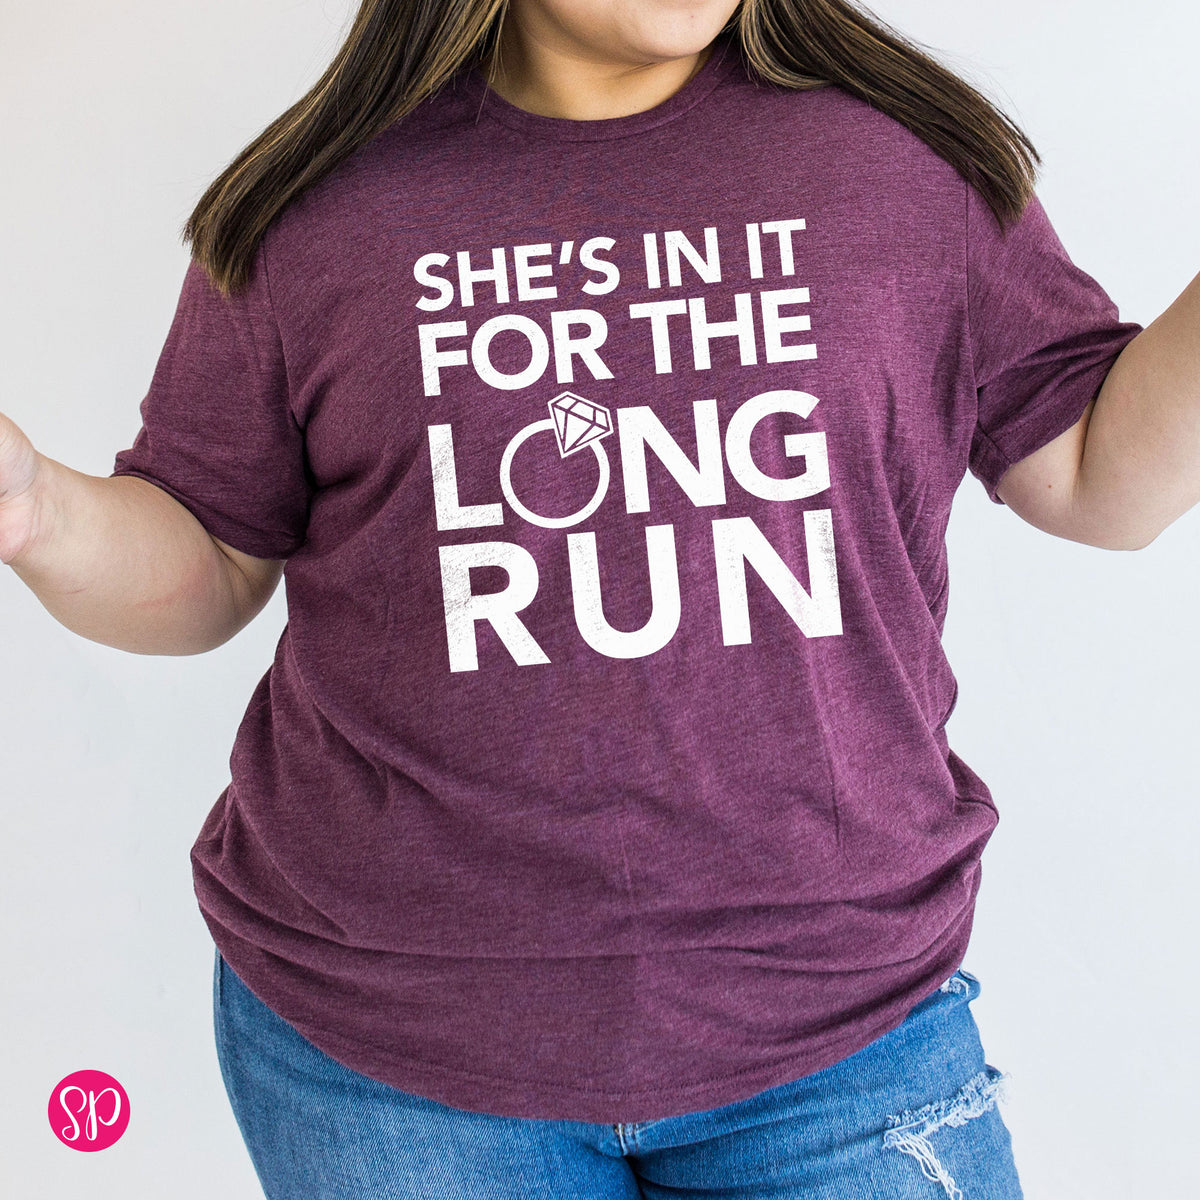 She's in it for the Long Run Unisex T-Shirt Bachelorette Bride Bridal Party Wedding Tee Shirt